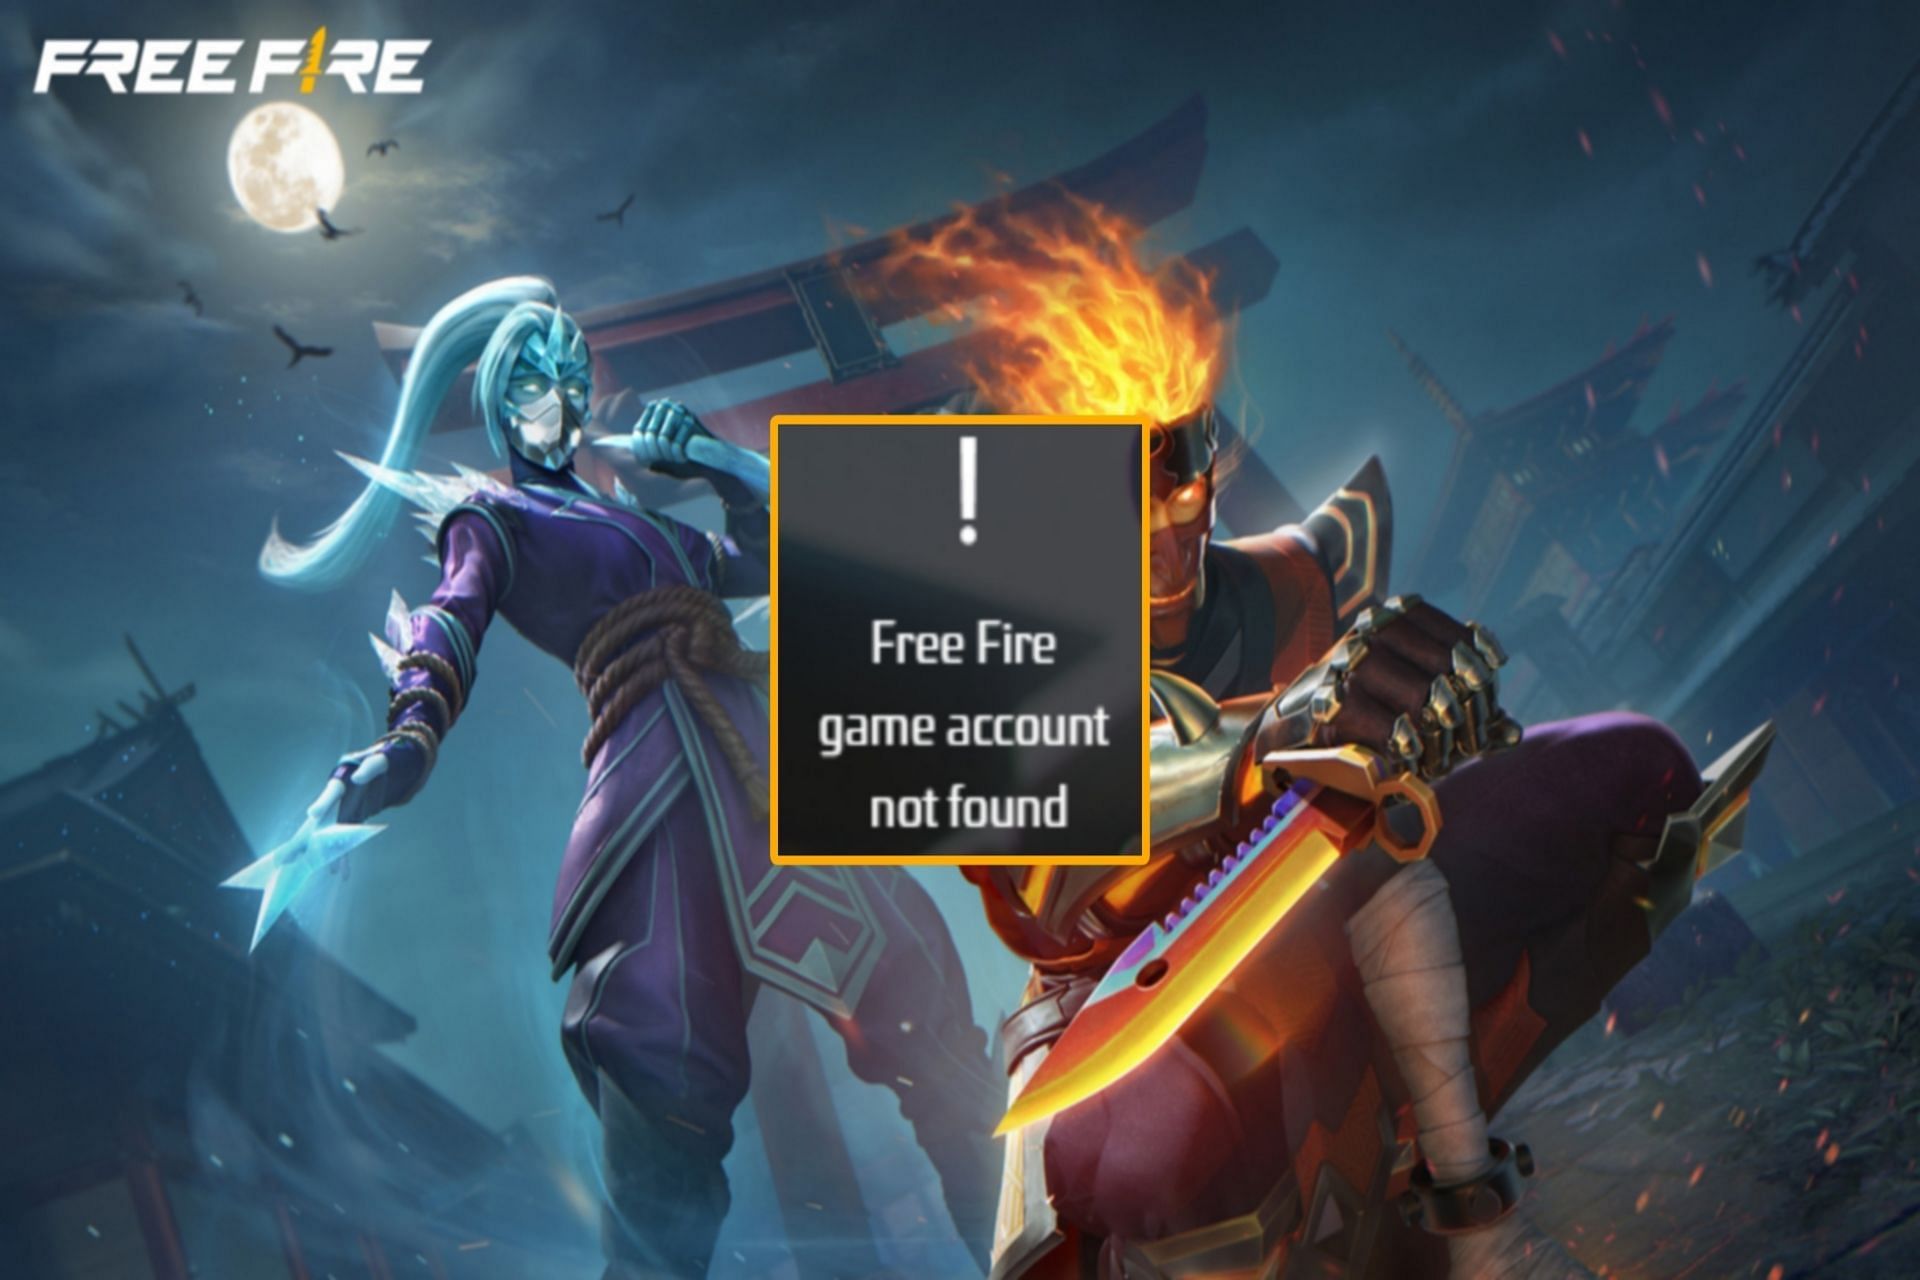 What is the reason behind the login error on the Advance Server website and how to resolve it? (Image via Garena)